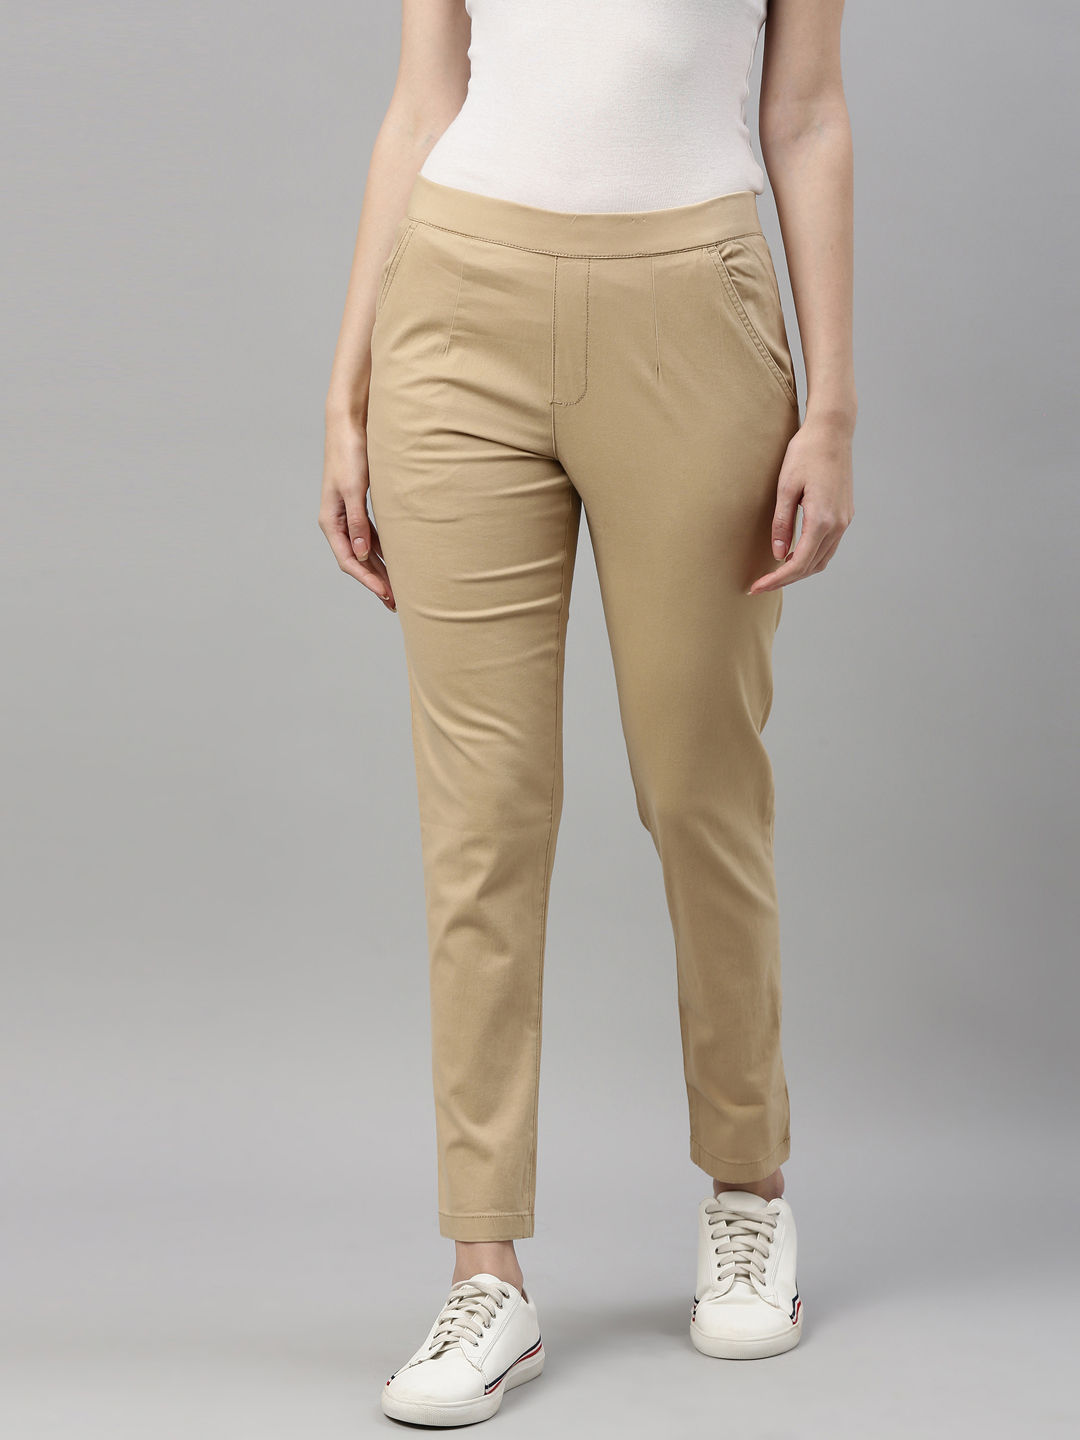 Buy Khaki Pants at Lowest Prices Online In India  Tata CLiQ